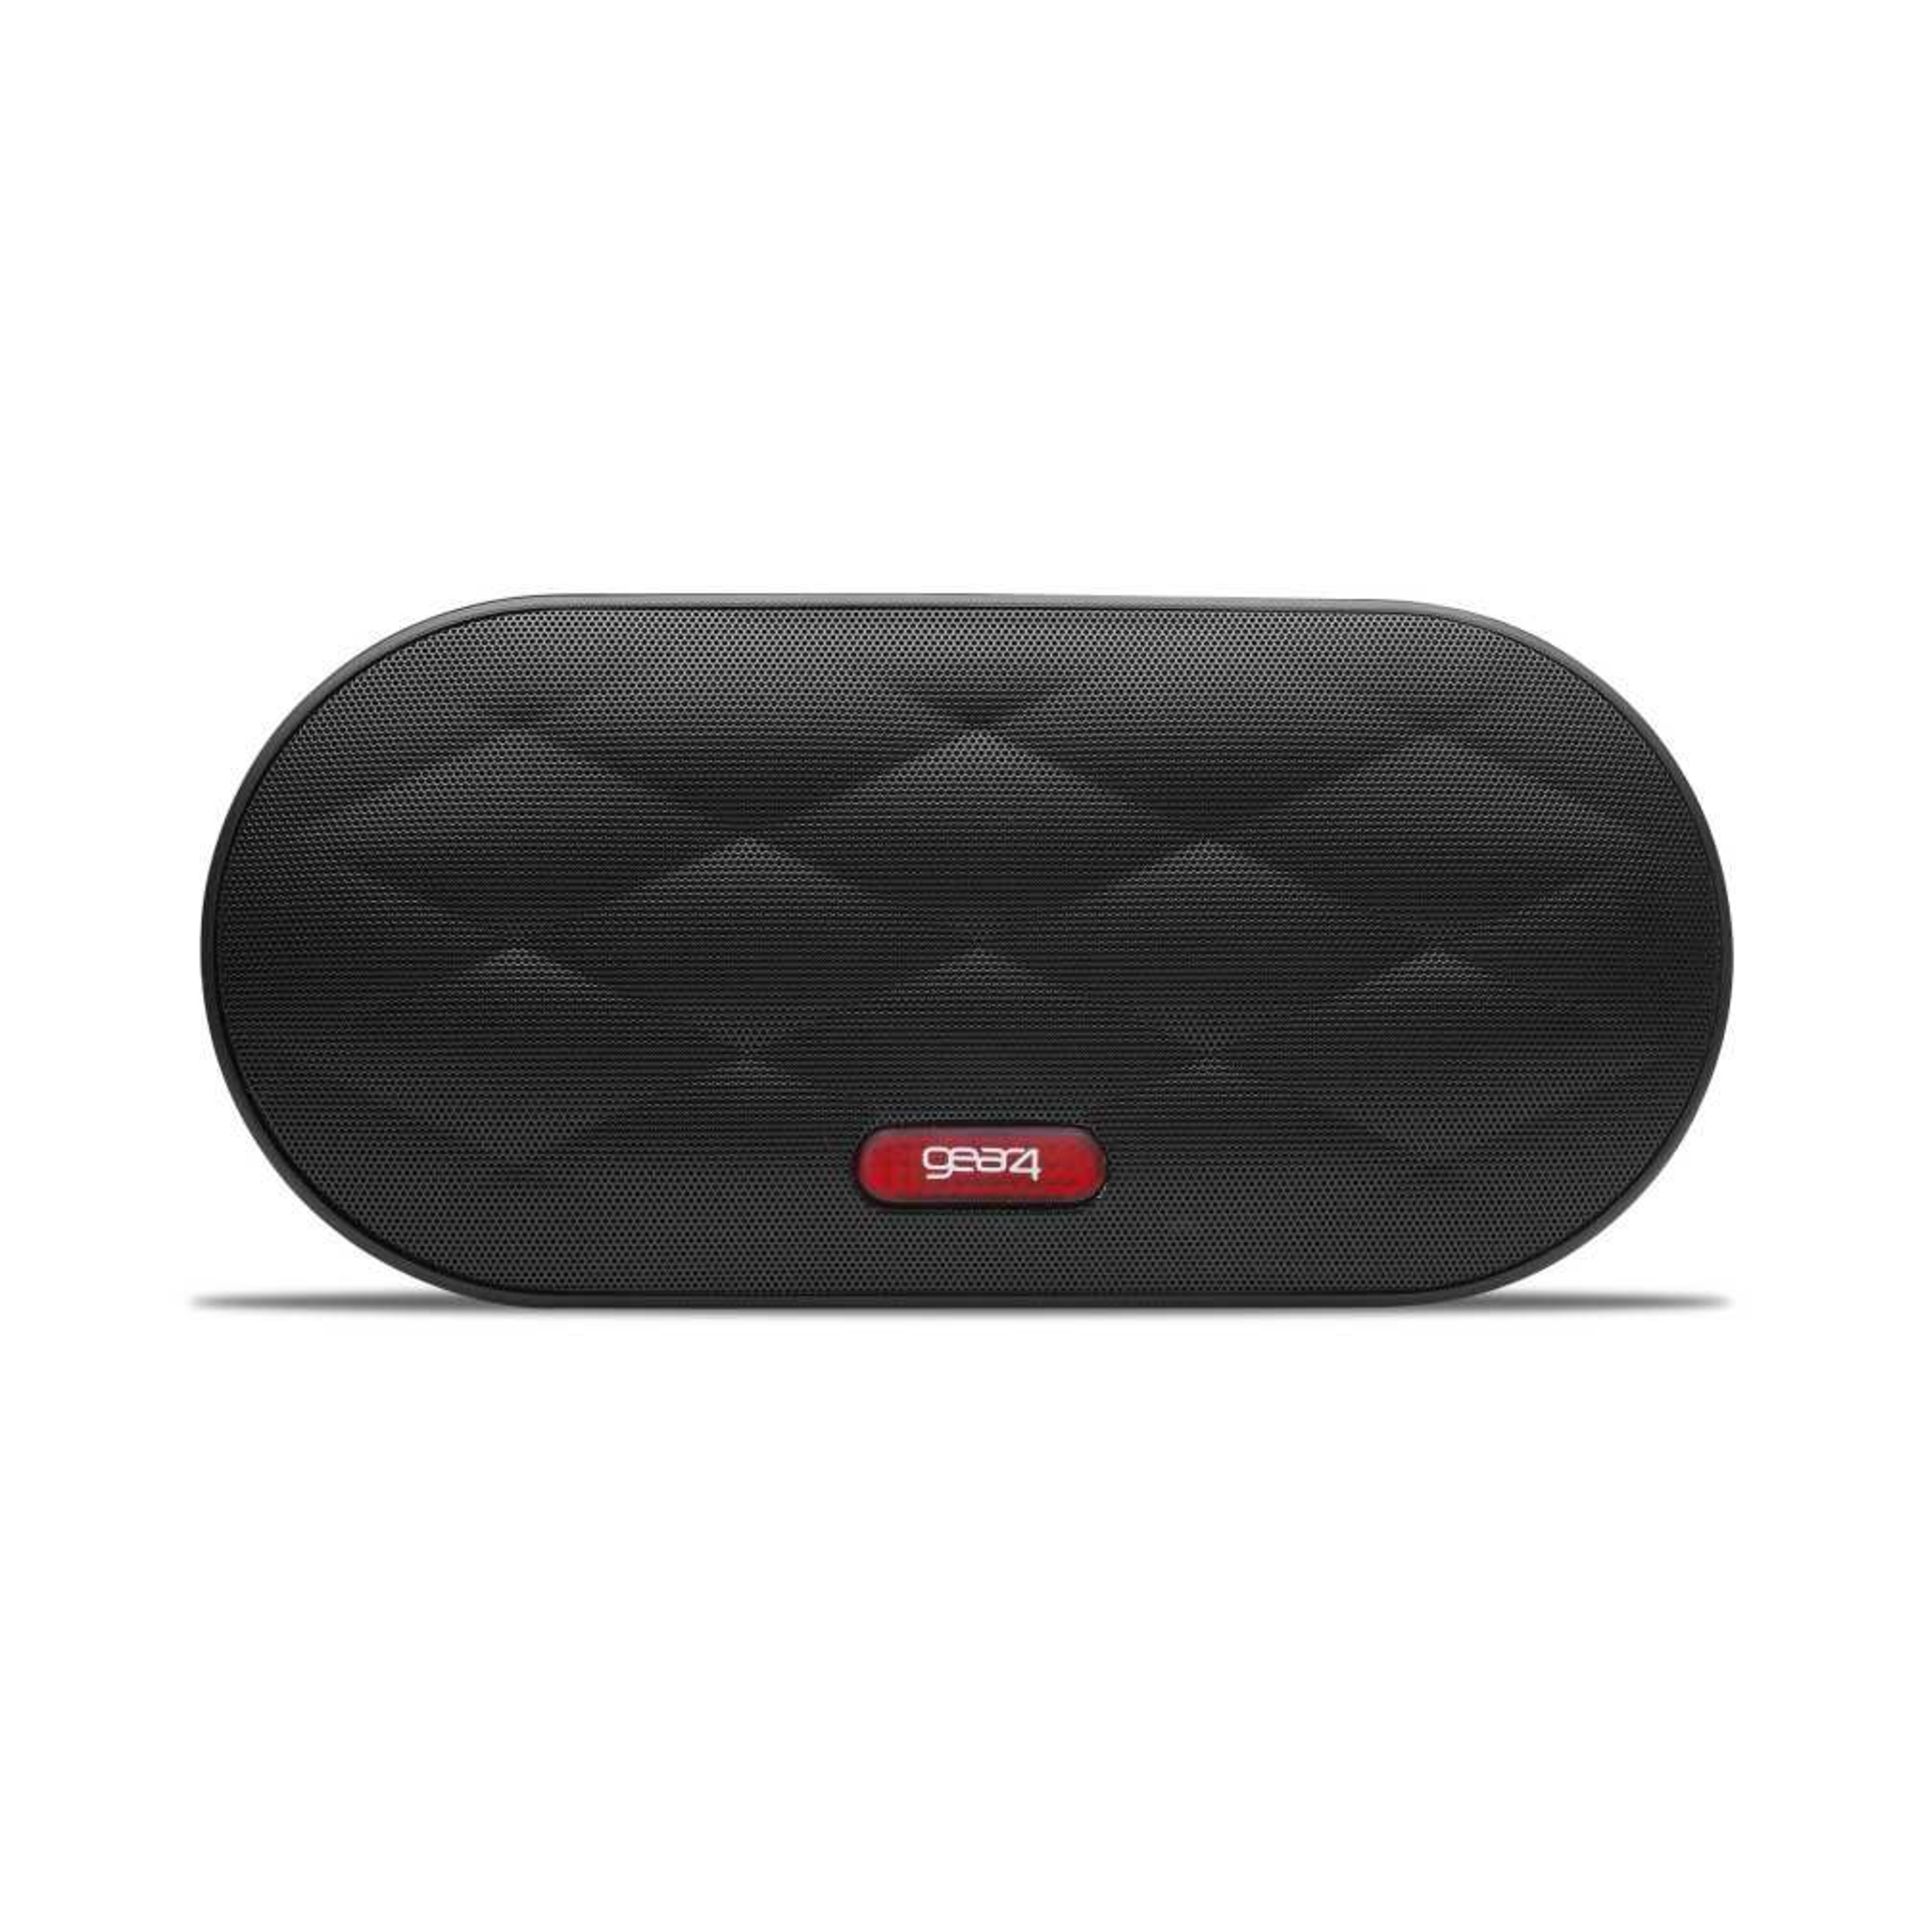 V *TRADE QTY* Brand New Gear4 XOME Stereo Bluetooth Speaker - Stream Music From Bluetooth Devices Or